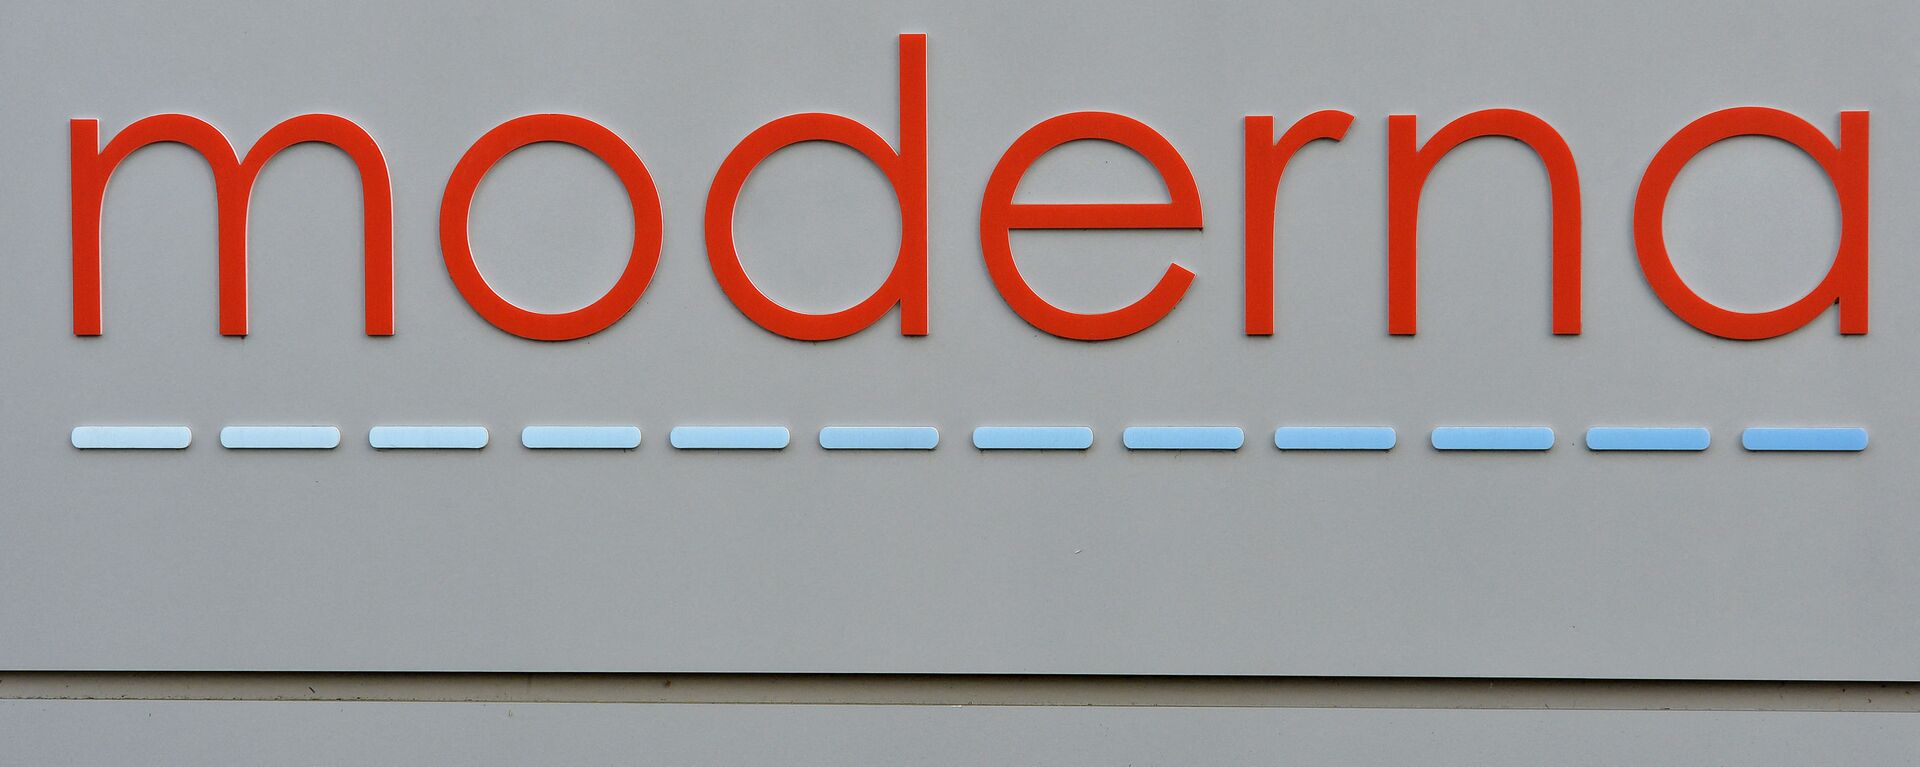 In this file photo the Moderna logo is seen at the Moderna campus in Norwood, Massachusetts on on December 2, 2020, where the biotechnology company is mass producing its Covid-19 vaccine. - US biotech firm Moderna said on July 7, 2021 it had dosed its first participants in a human study of an mRNA vaccine that targets multiple strains of influenza. The company intends to recruit 180 adults in the United States for the Phase 1/2 portion of the trial to evaluate the safety and strength of immune response to the shot, called mRNA-1010. - Sputnik International, 1920, 30.11.2021